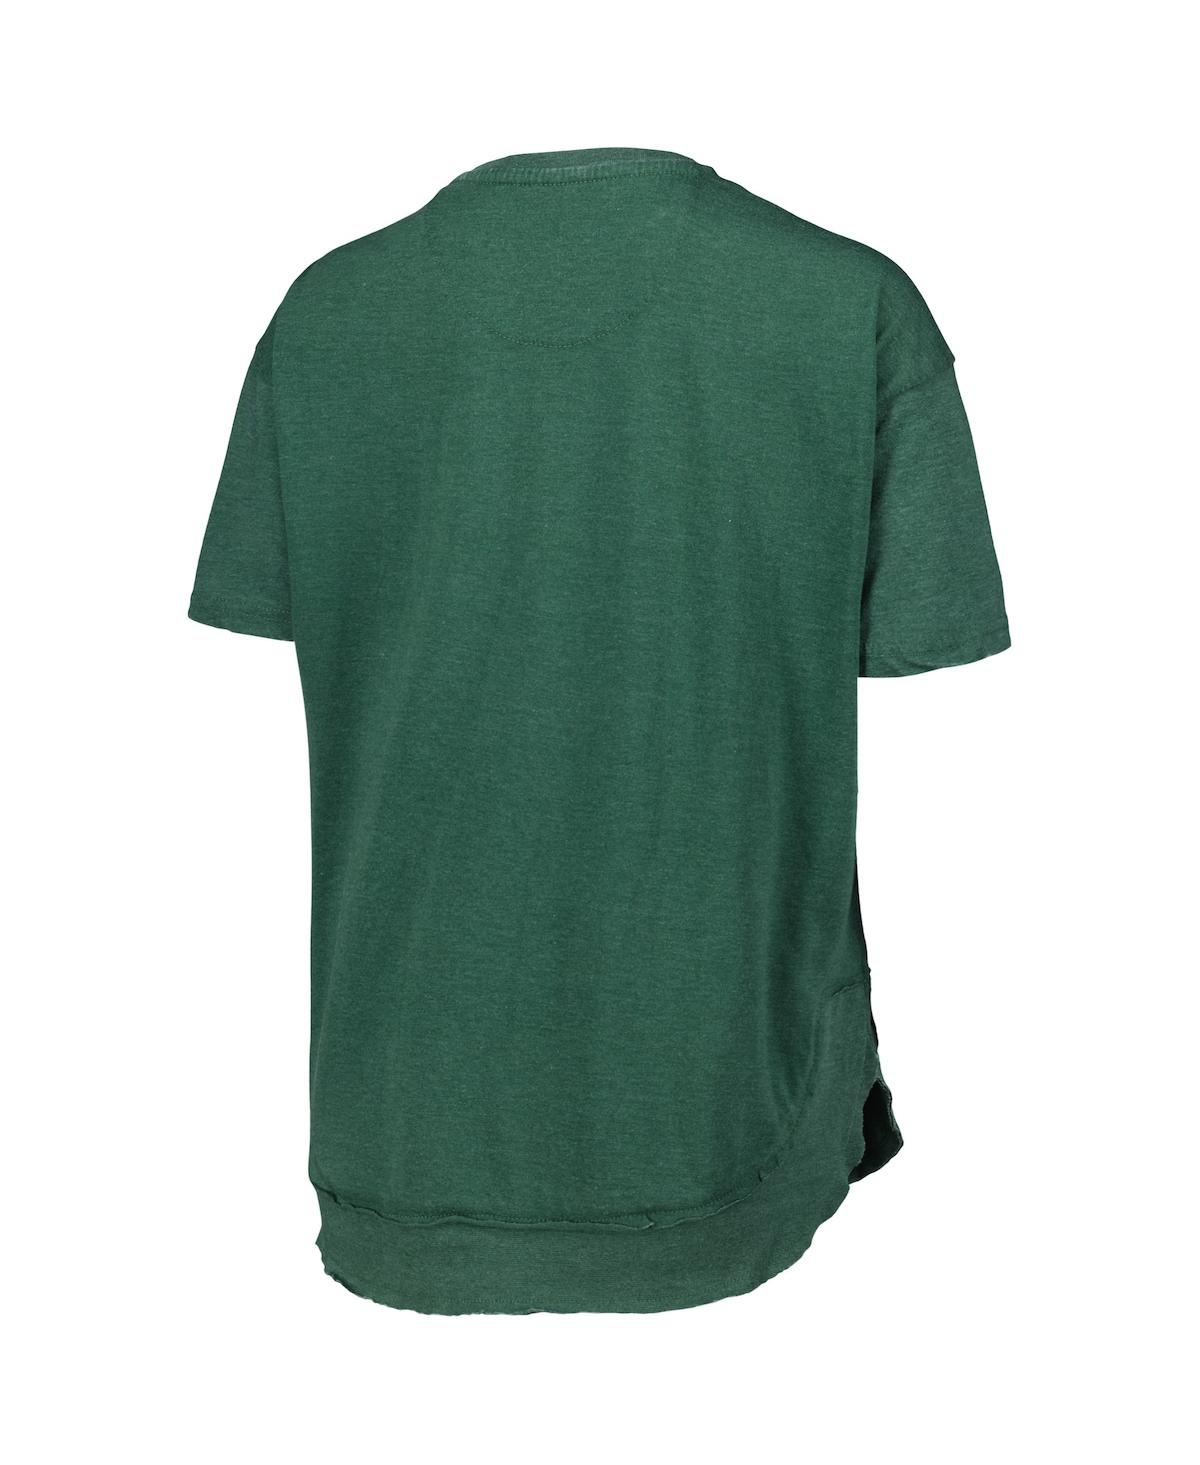 Shop Pressbox Women's  Heathered Green Distressed Michigan State Spartans Arch Poncho T-shirt In Heather Green